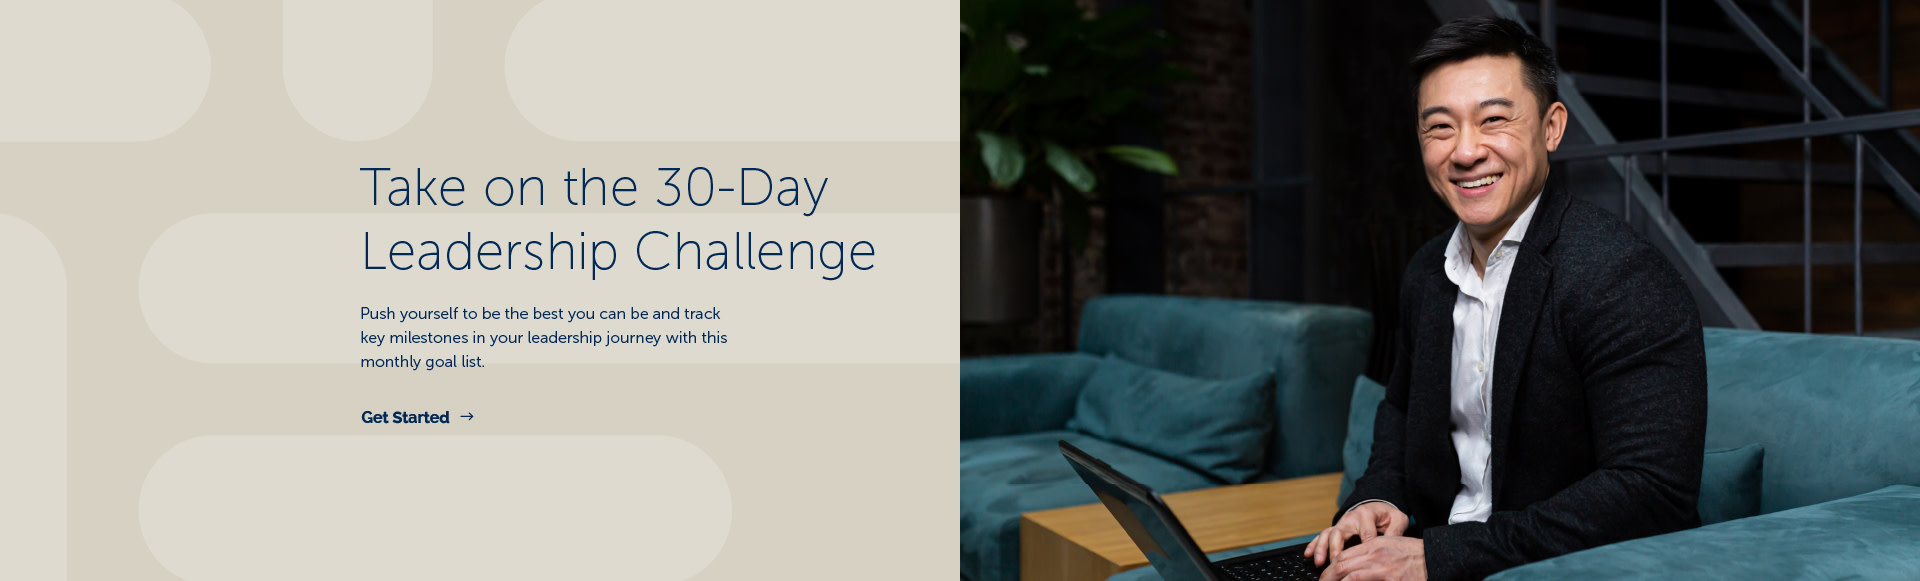 Take on the 30-Day Leadership Challenge